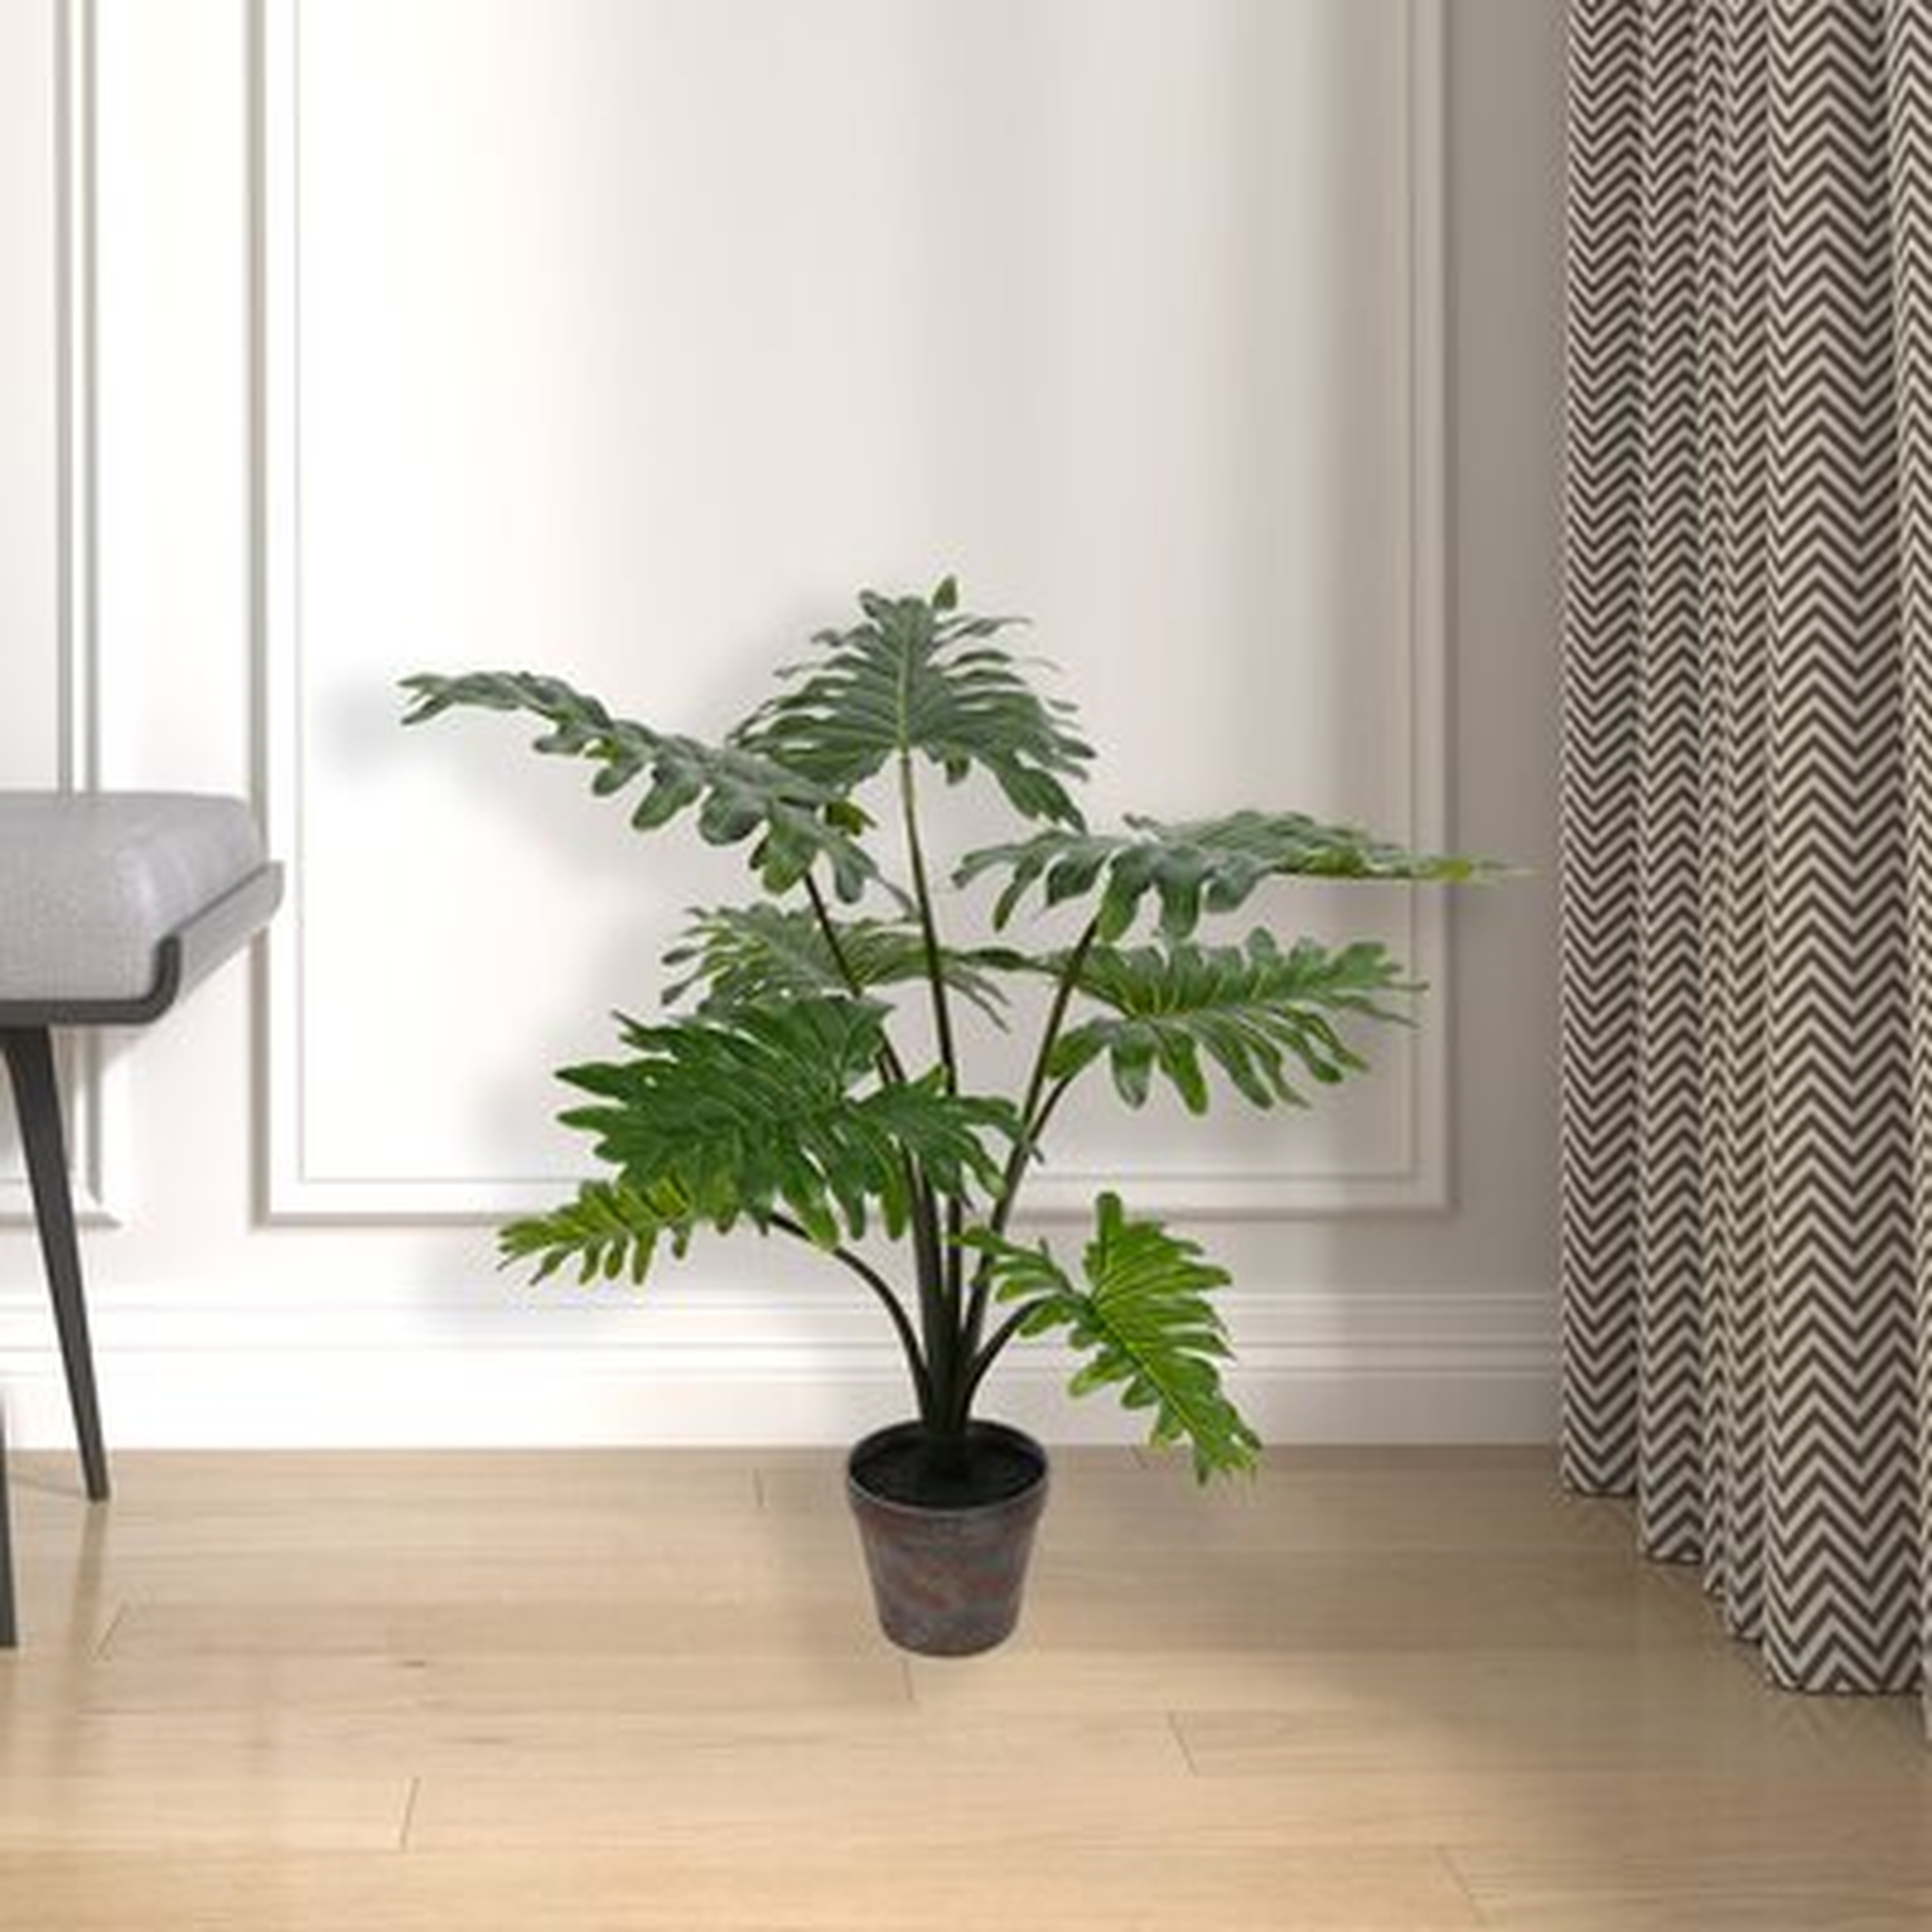 Artificial Potted Grand Floor Philodendron Tree in Pot - Wayfair